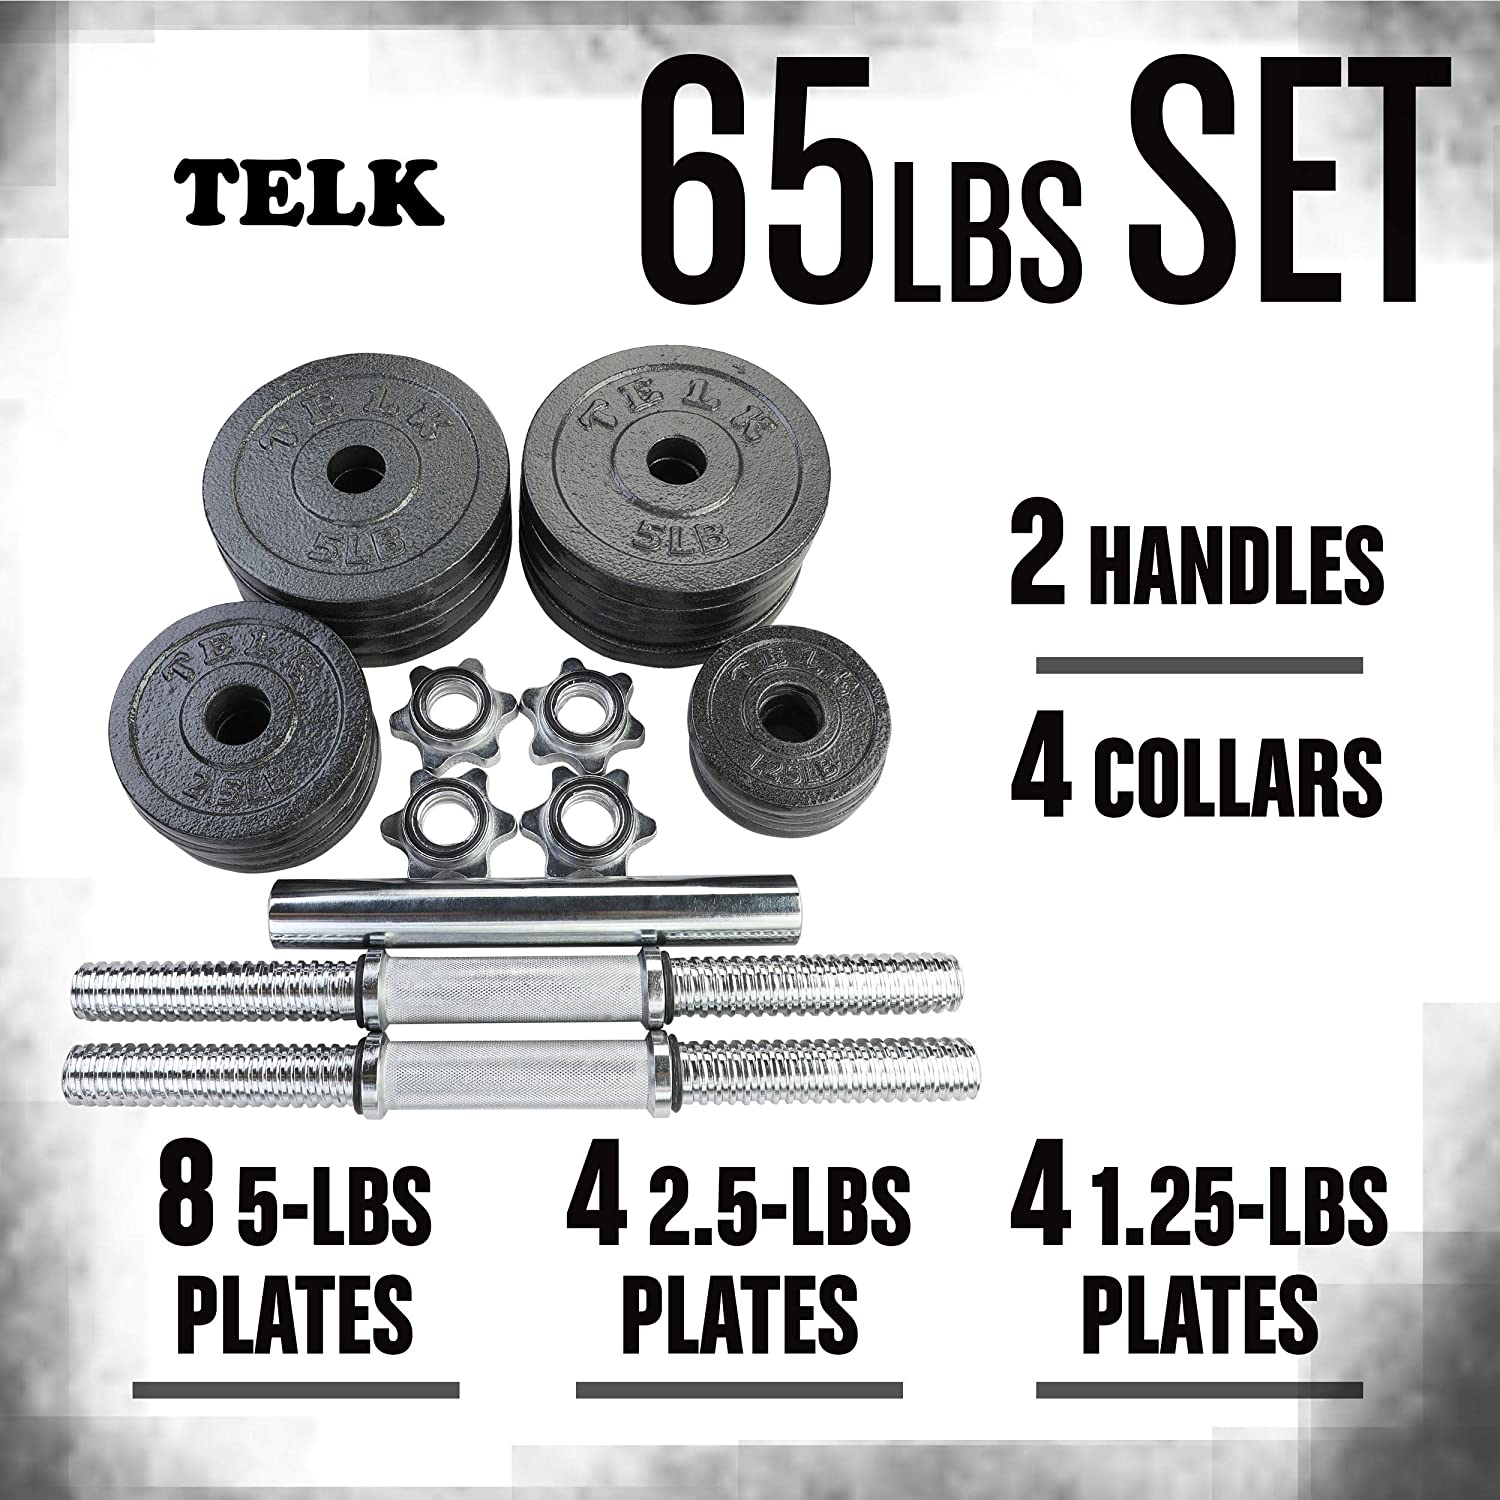 Telk Fitness, Adjustable Dumbbells 65 Lbs., Hand Weights for Home Gym - image 2 of 8